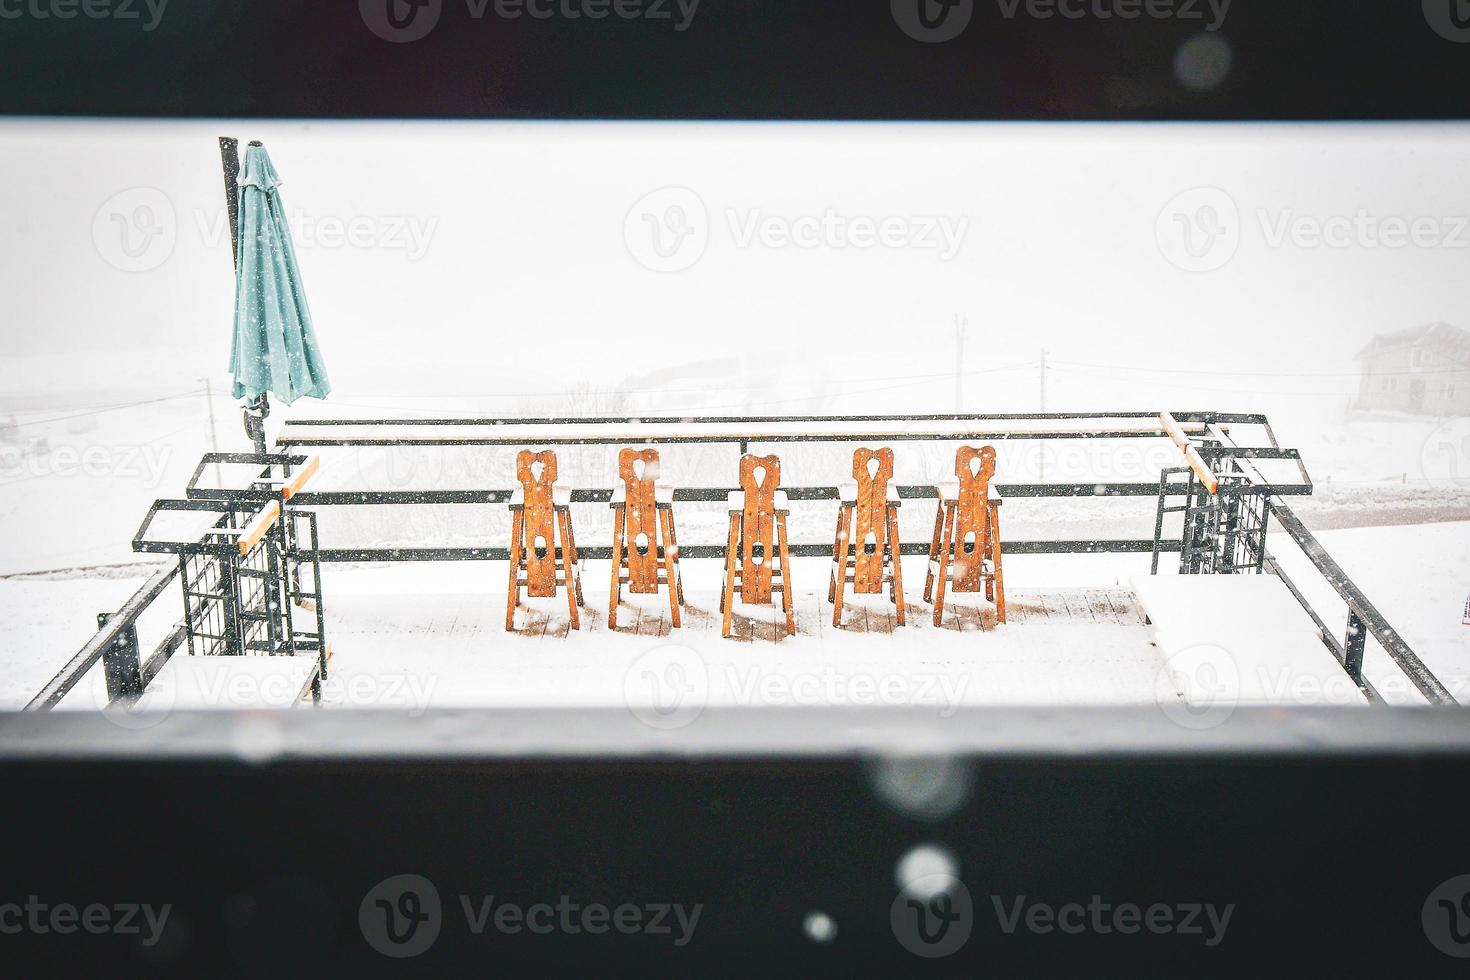 Chairs on snow in snowy day in ski resort restaurant. Bad weather fresh snow in winter holiday resort. photo